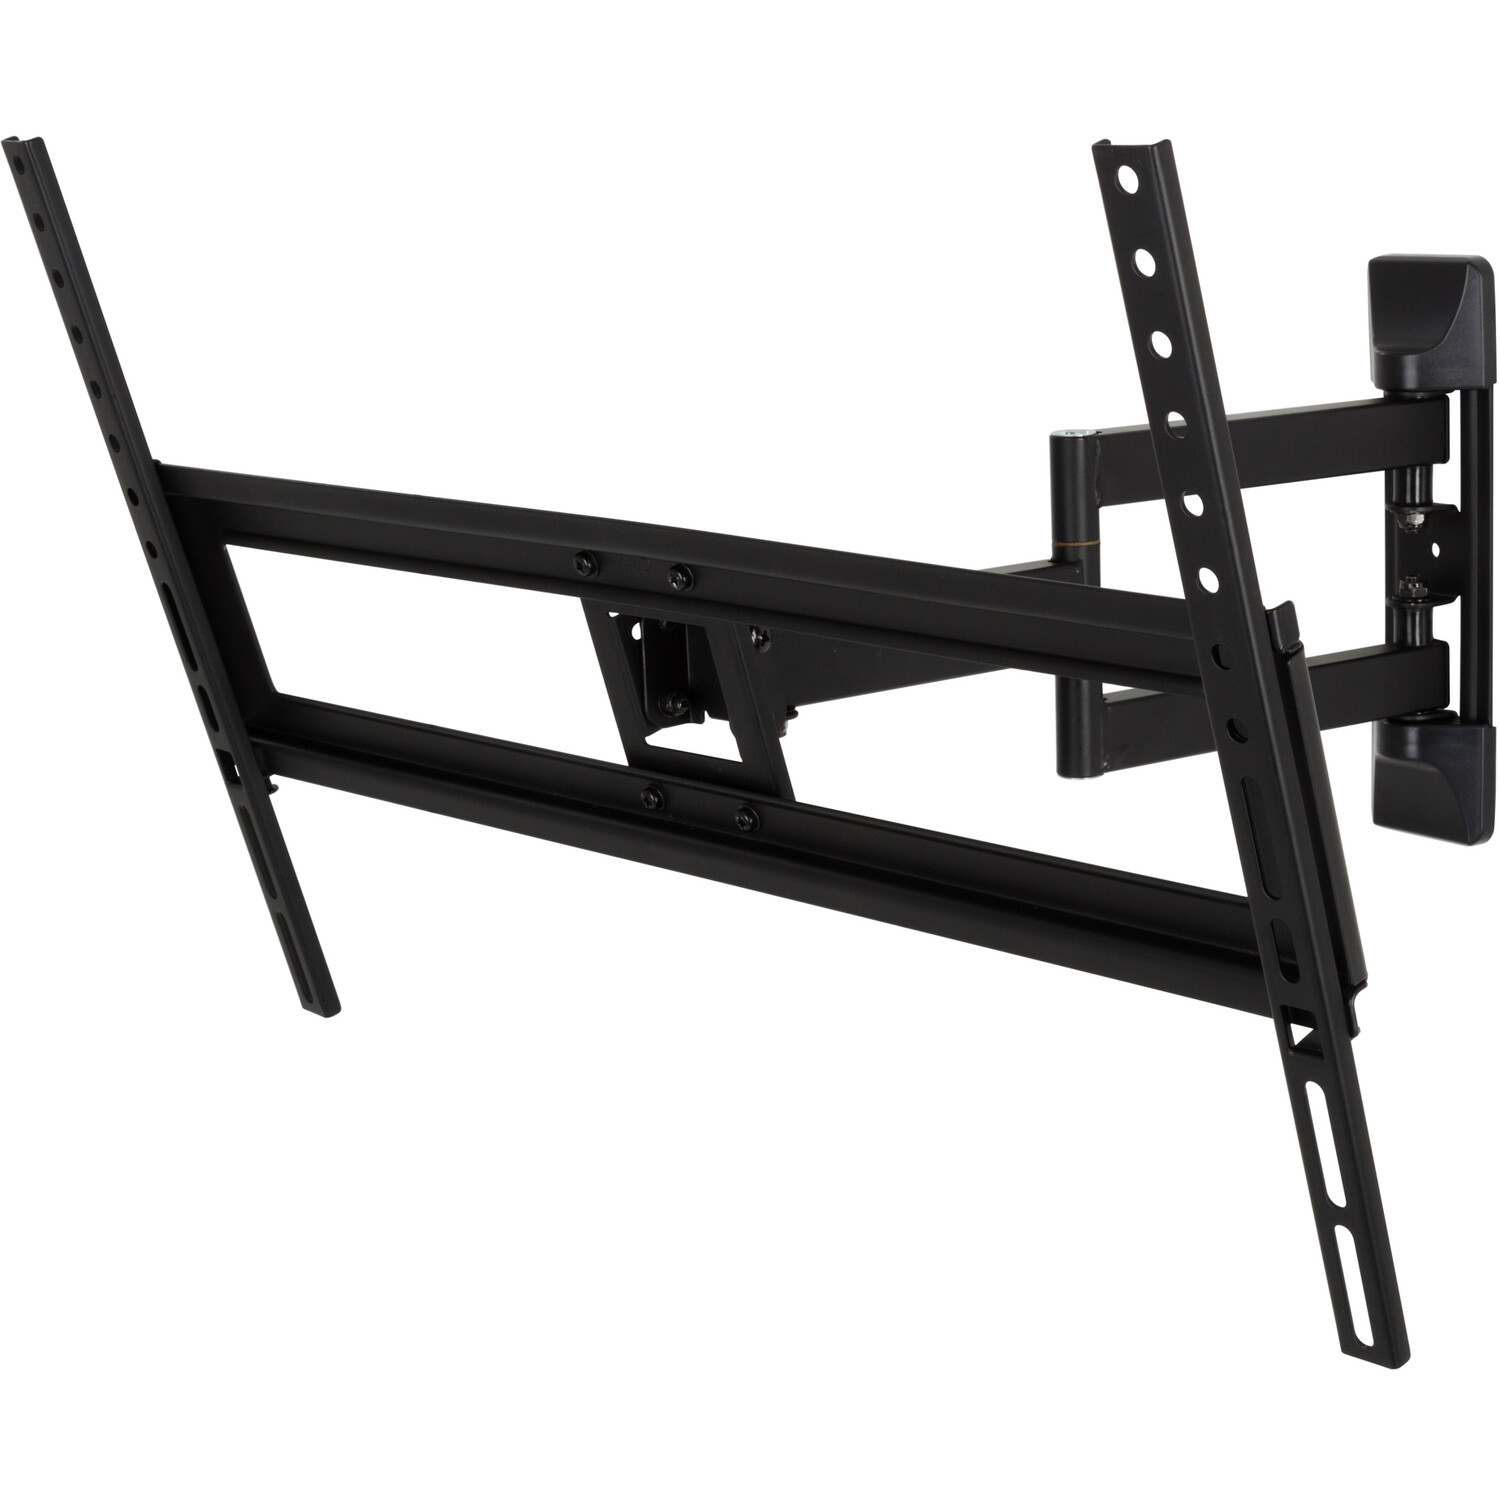 37 to 80 inch Multi-Position Black TV Mount Image 3